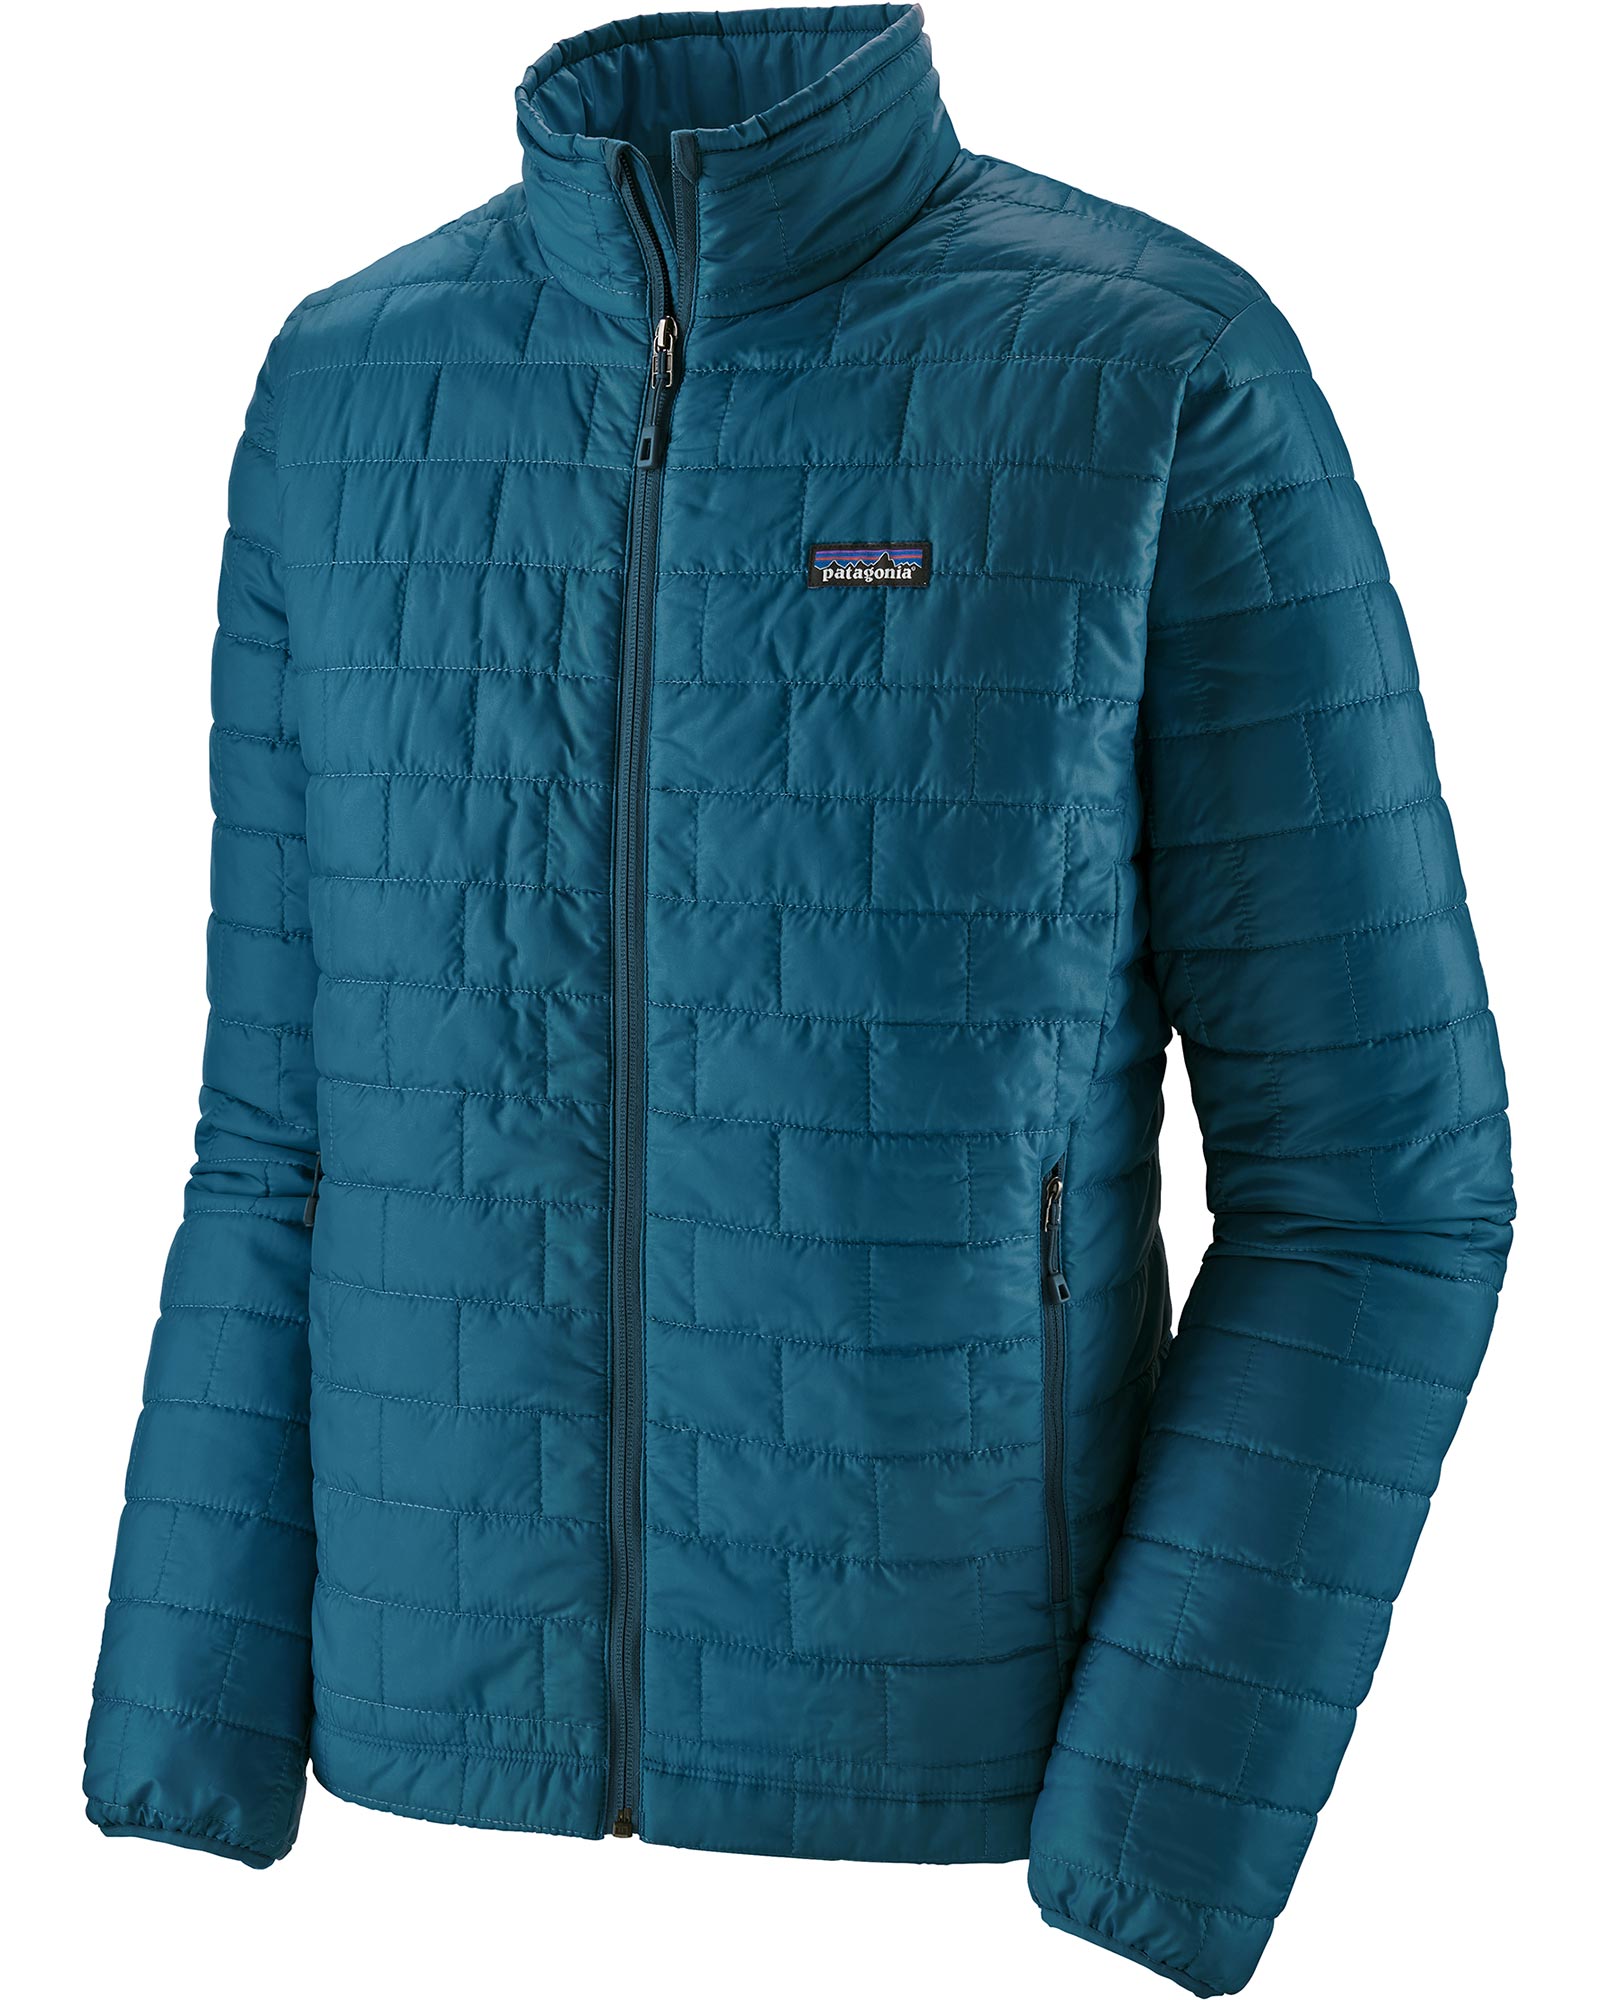 Patagonia Nano Puff Men’s Insulated Jacket - Crater Blue L